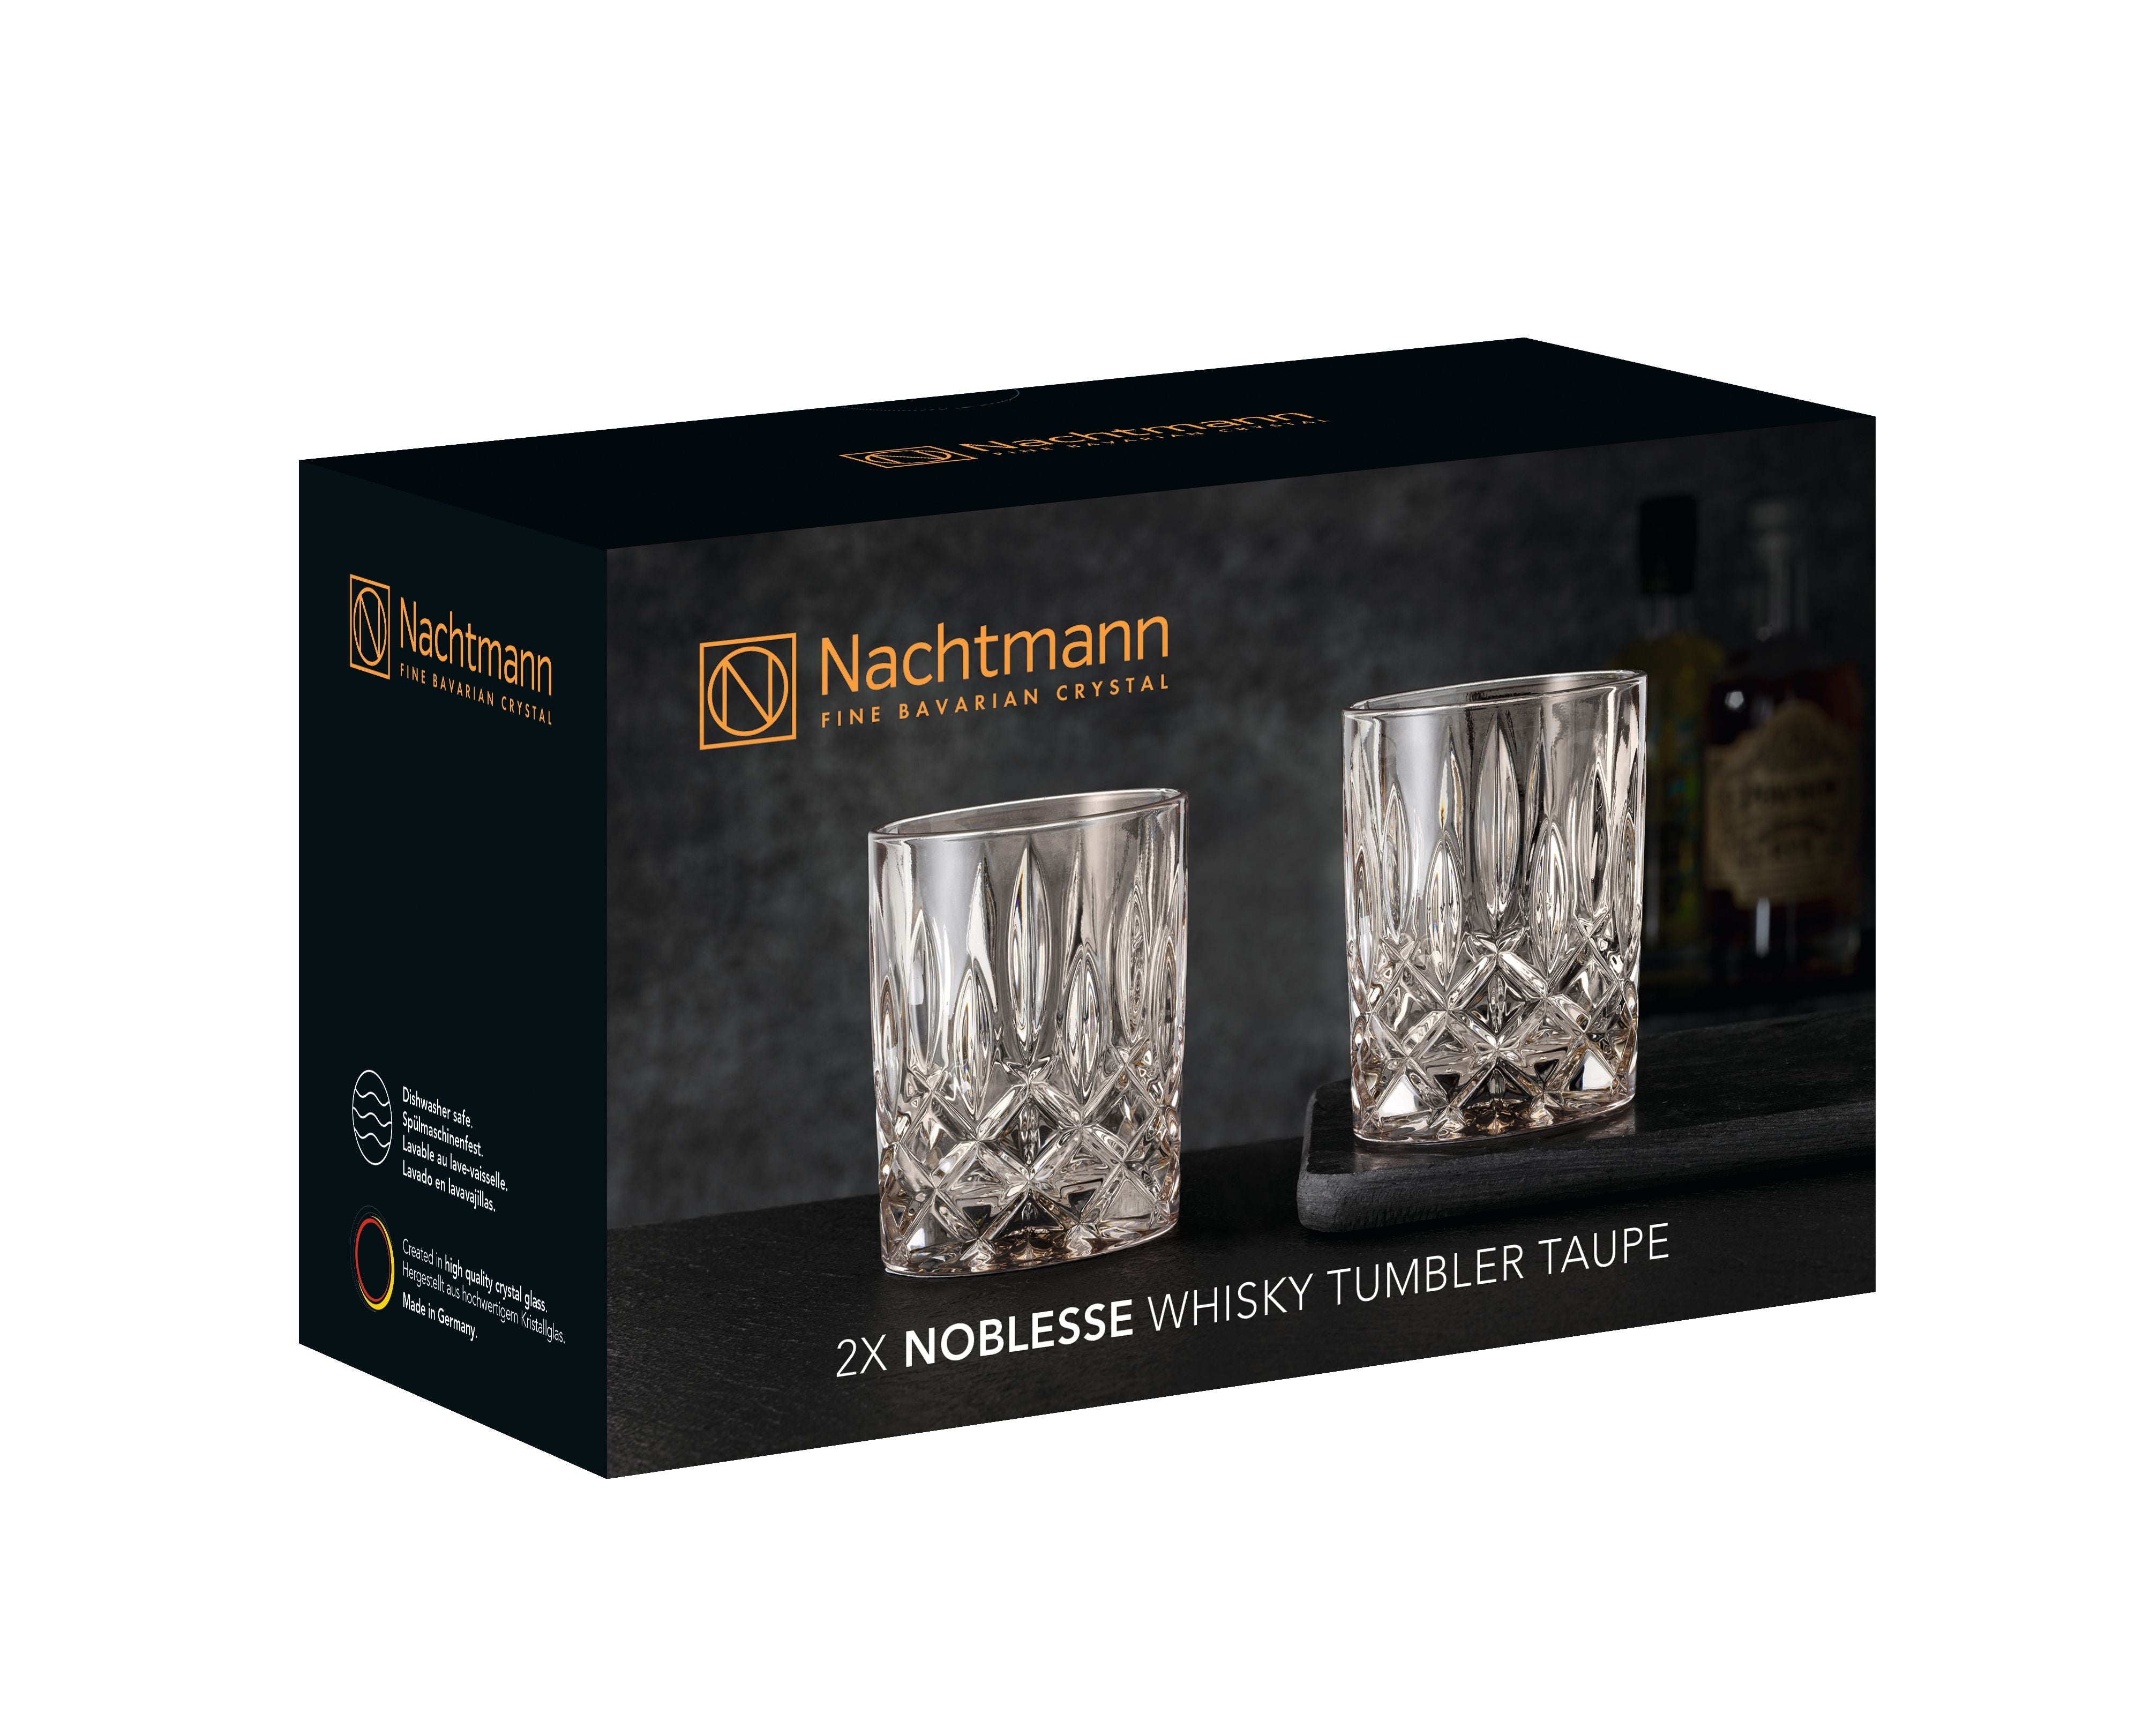 Nachtmann Noblesse Whisky Glass Taupe 295 ml, juego de 2